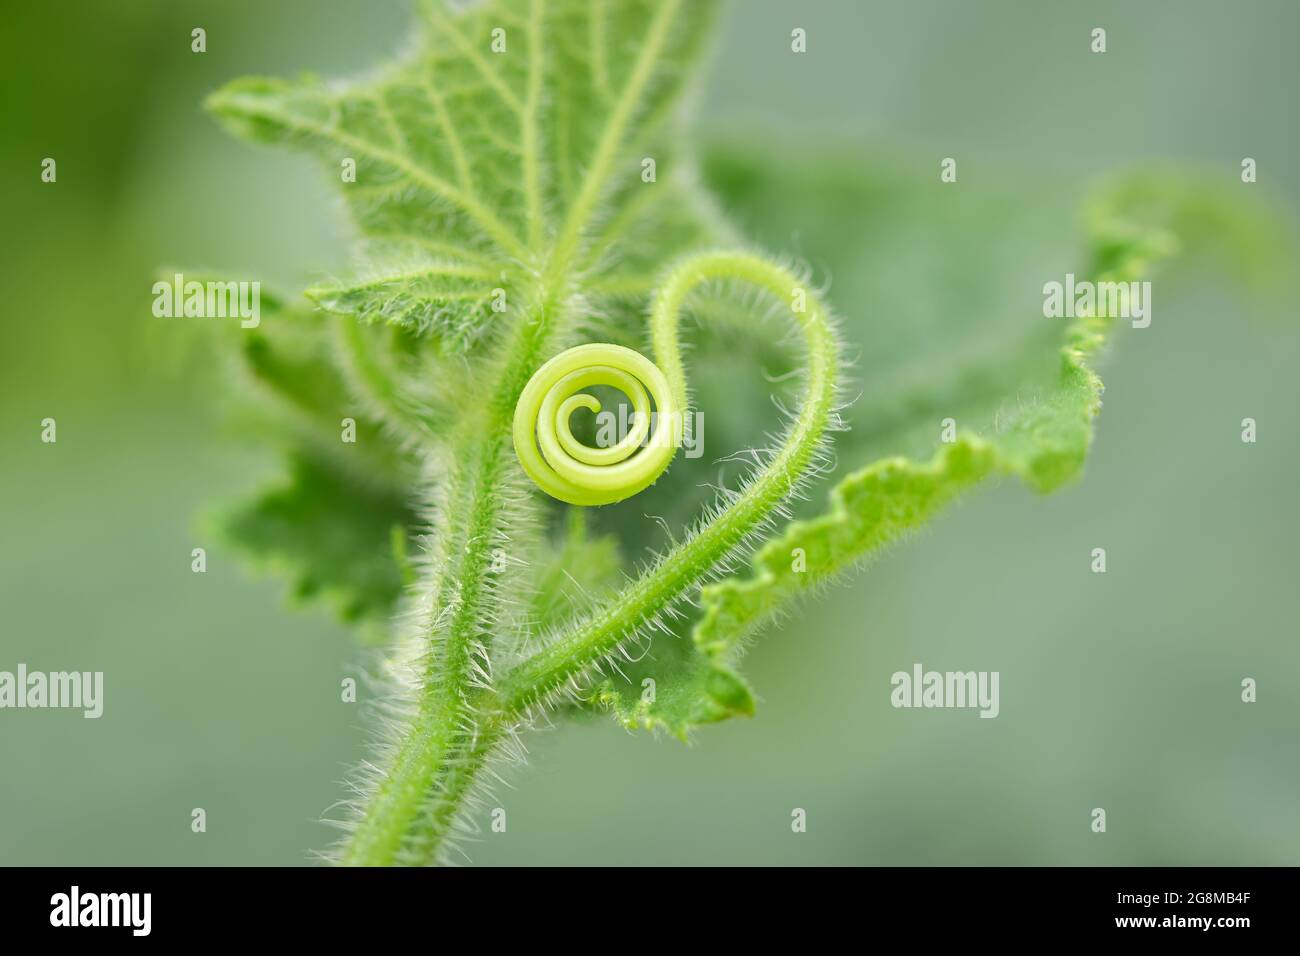 Creeping spiral tendril of cucumber (Cucumis sativus) plant, shallow depth of field macro photography Stock Photo